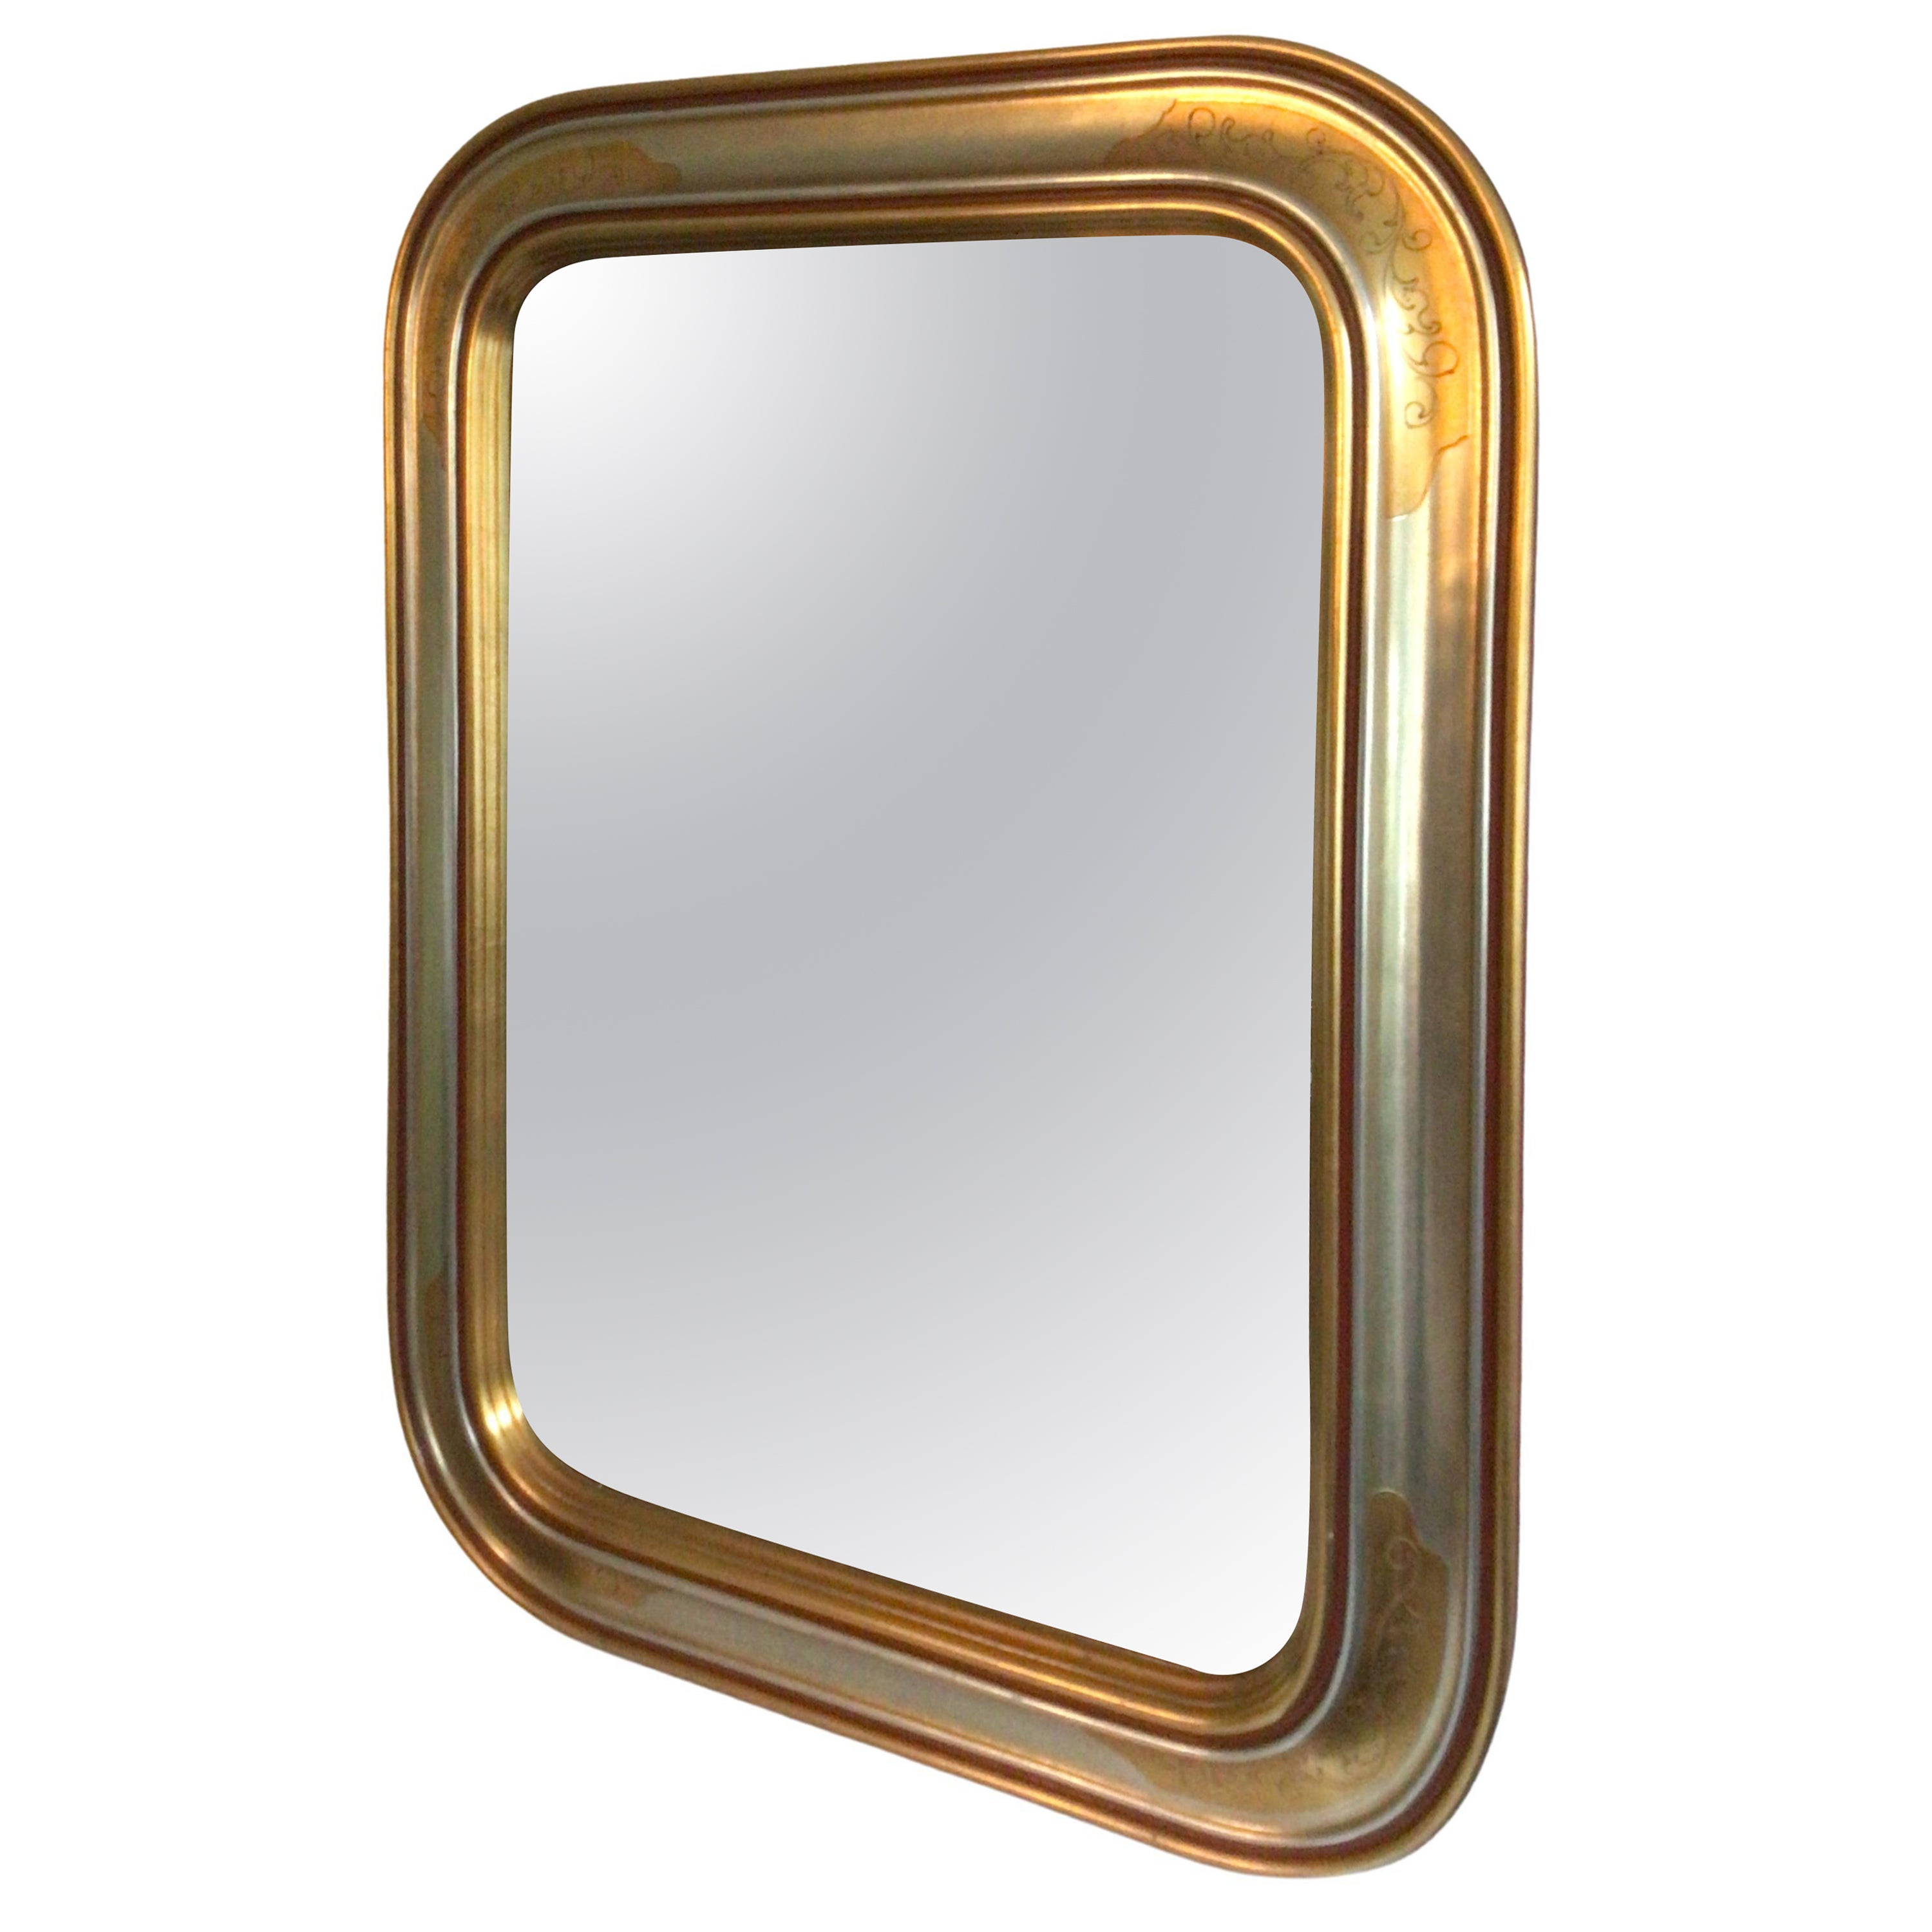 1970s Gilt and Silver Leaf Wood Wall Mirror With Beveled Glass